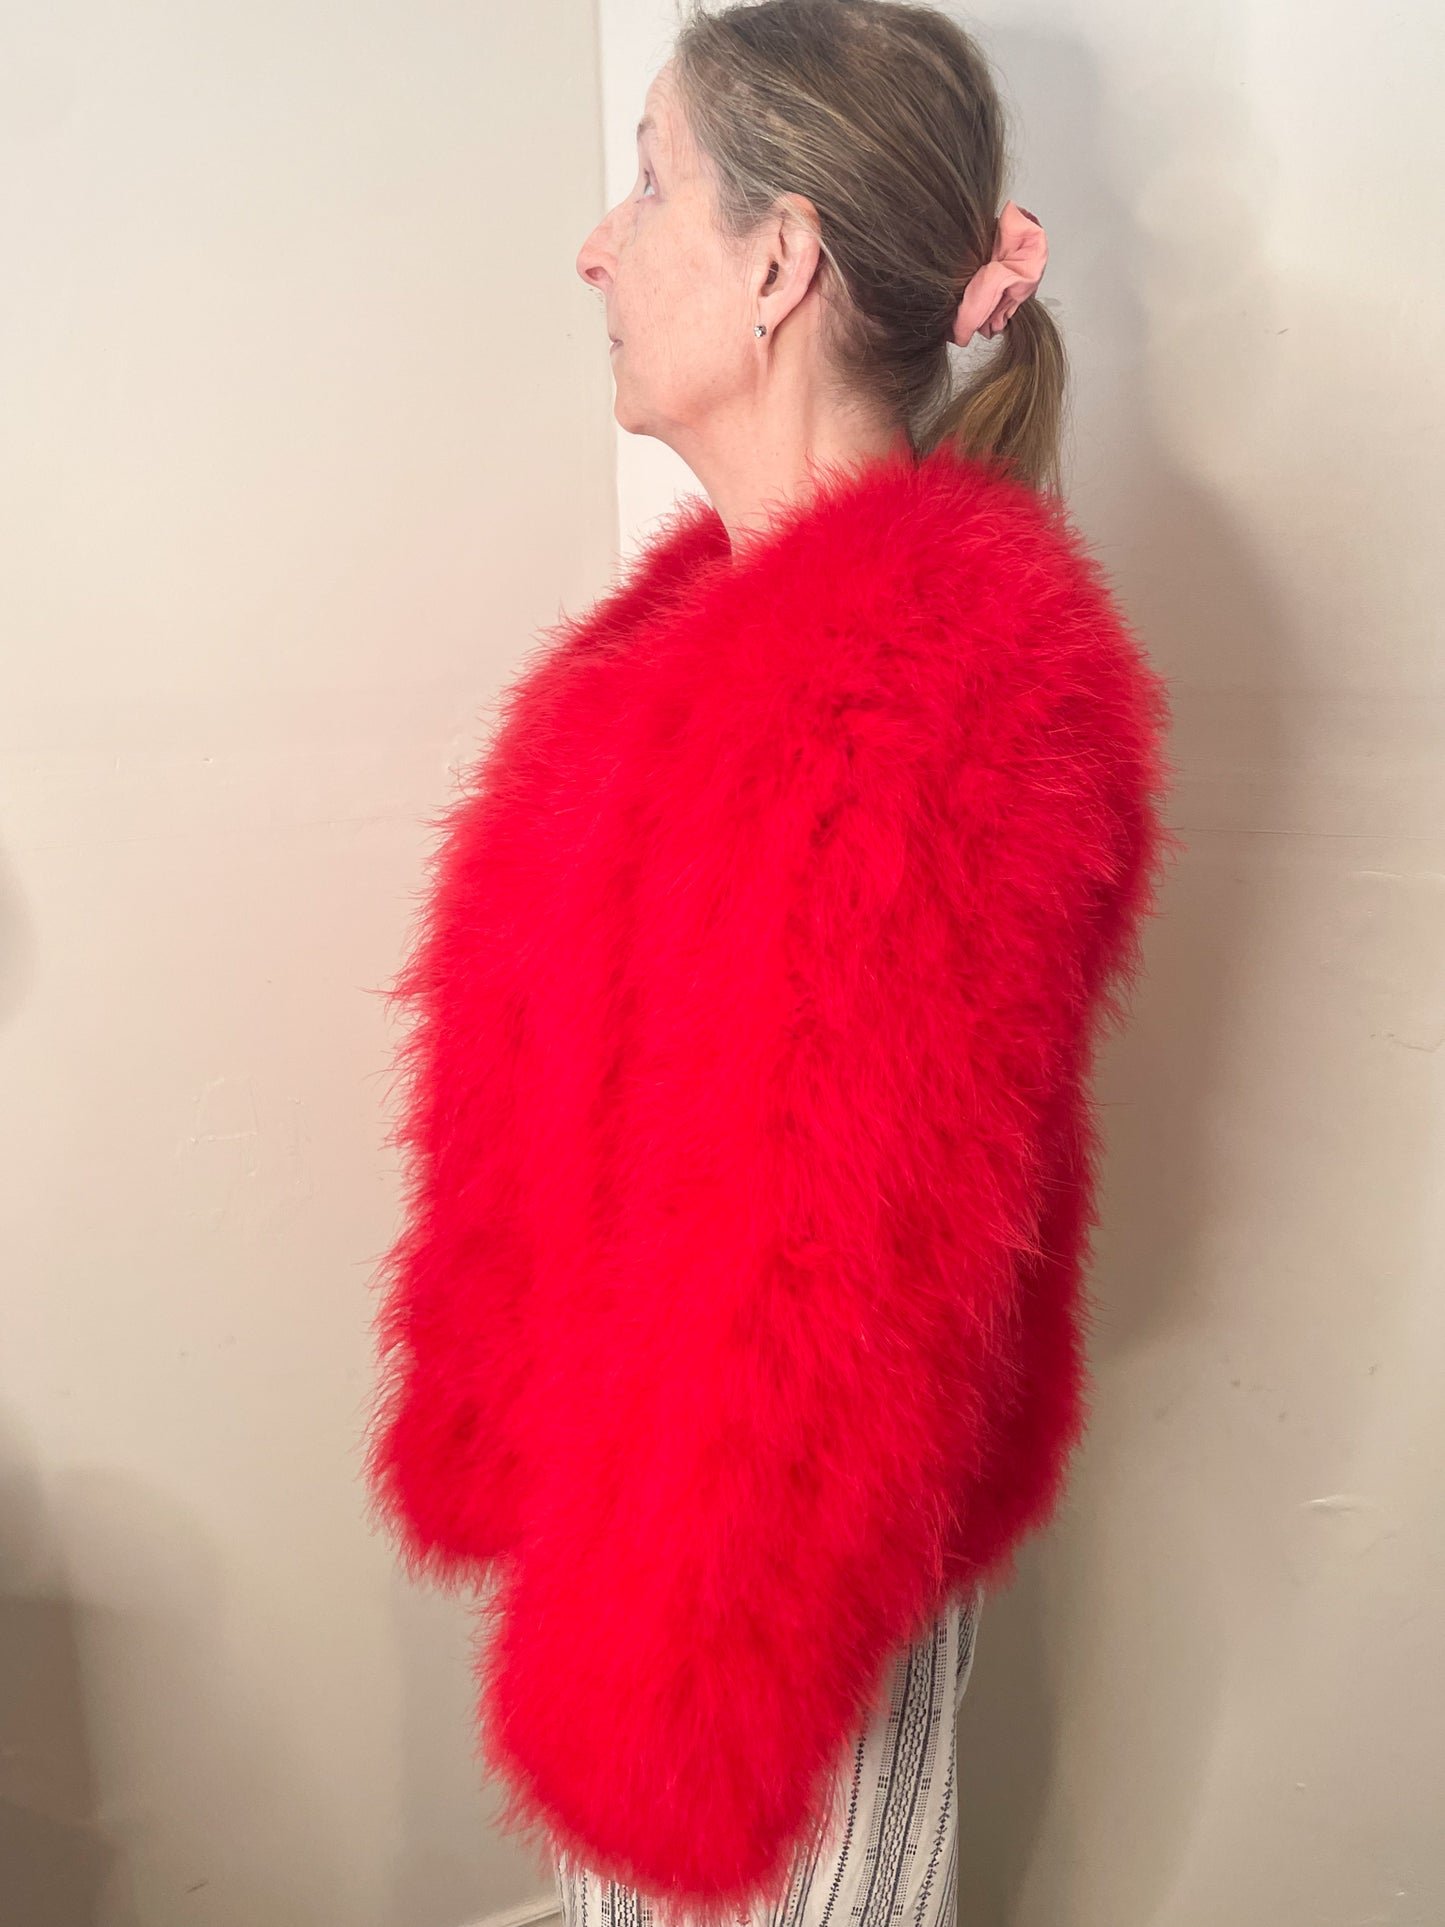 Pello Bello Red Real Feather Fluffy Statement Jacket - Medium (In-Store Exclusive)